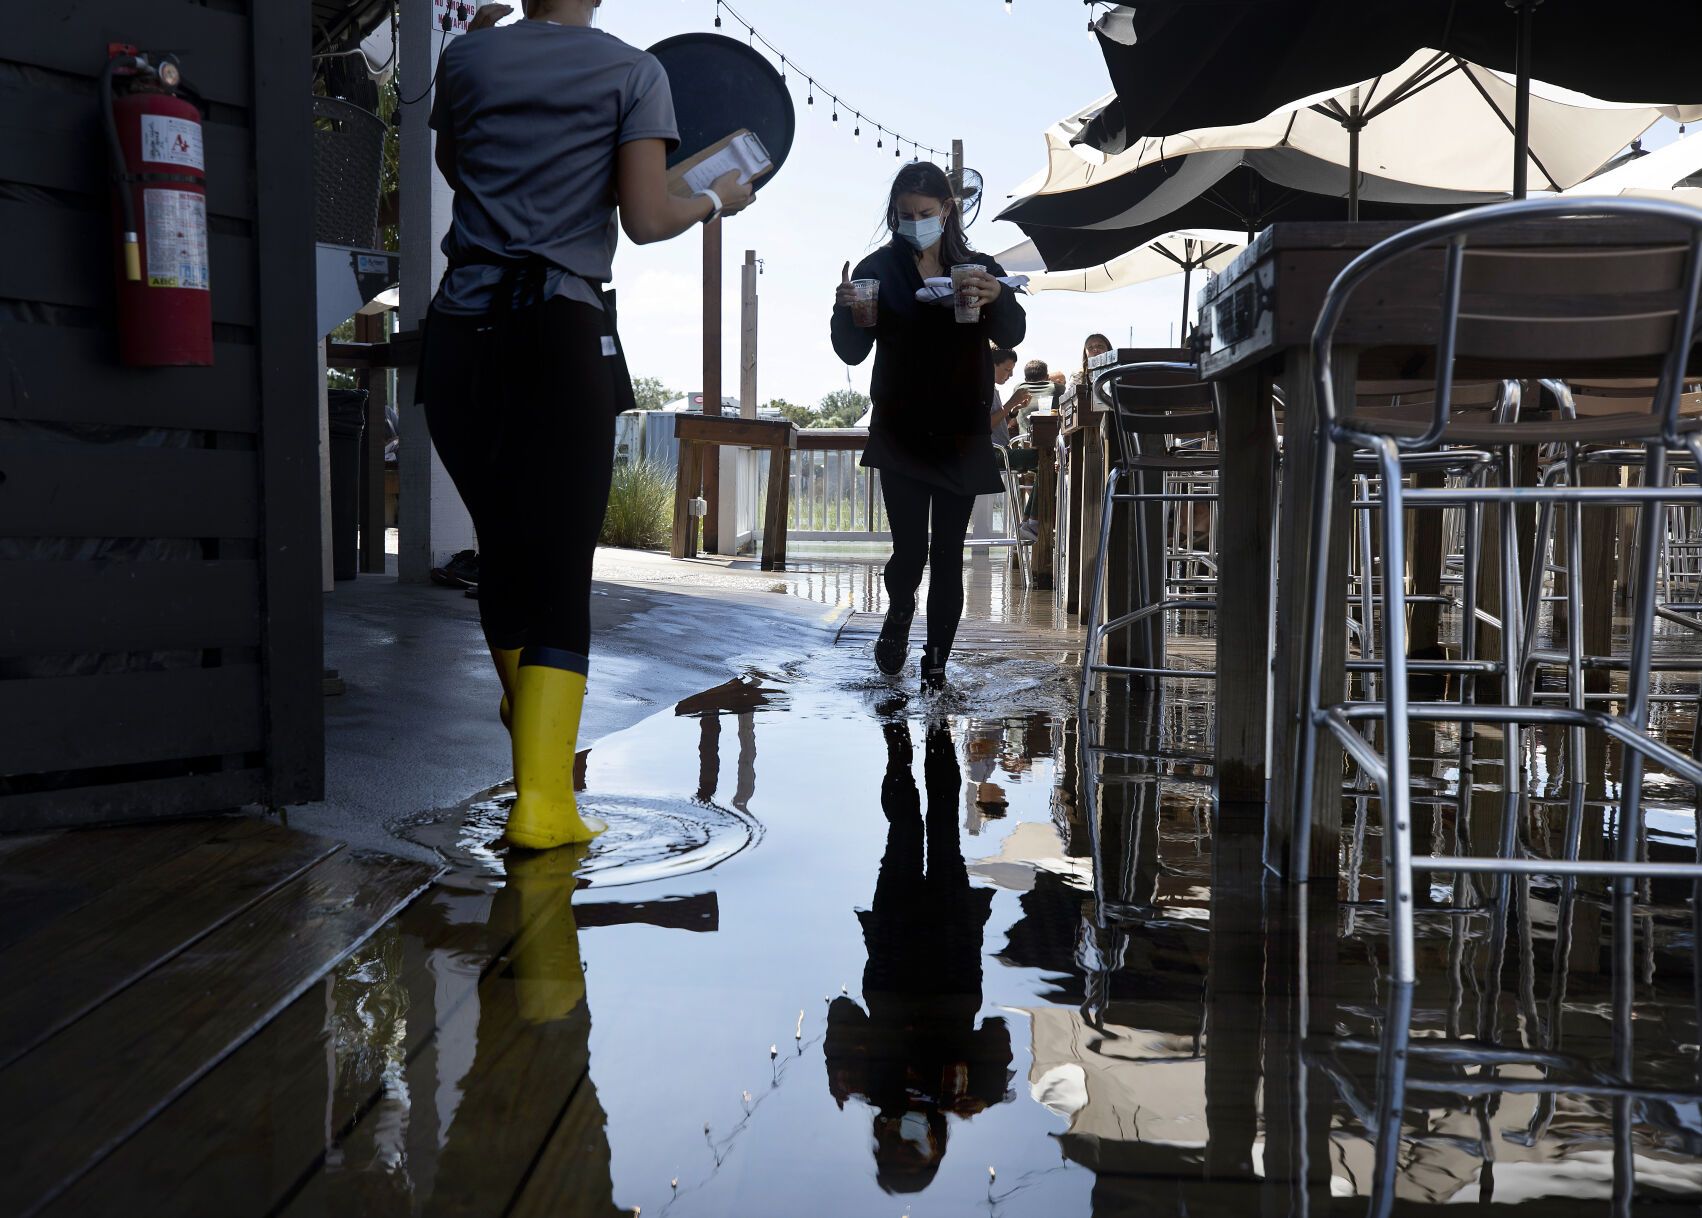 Servers Alexandra Schroettner and Christi Hughes wade through salt water that has risen over the patio at Saltwater Cowboys as they serve guests lunch on Shem Creek on Monday, Sept. 21, 2020, in Mount Pleasant. Image by Grace Beahm Alford / Post and Courier. United States, 2020.